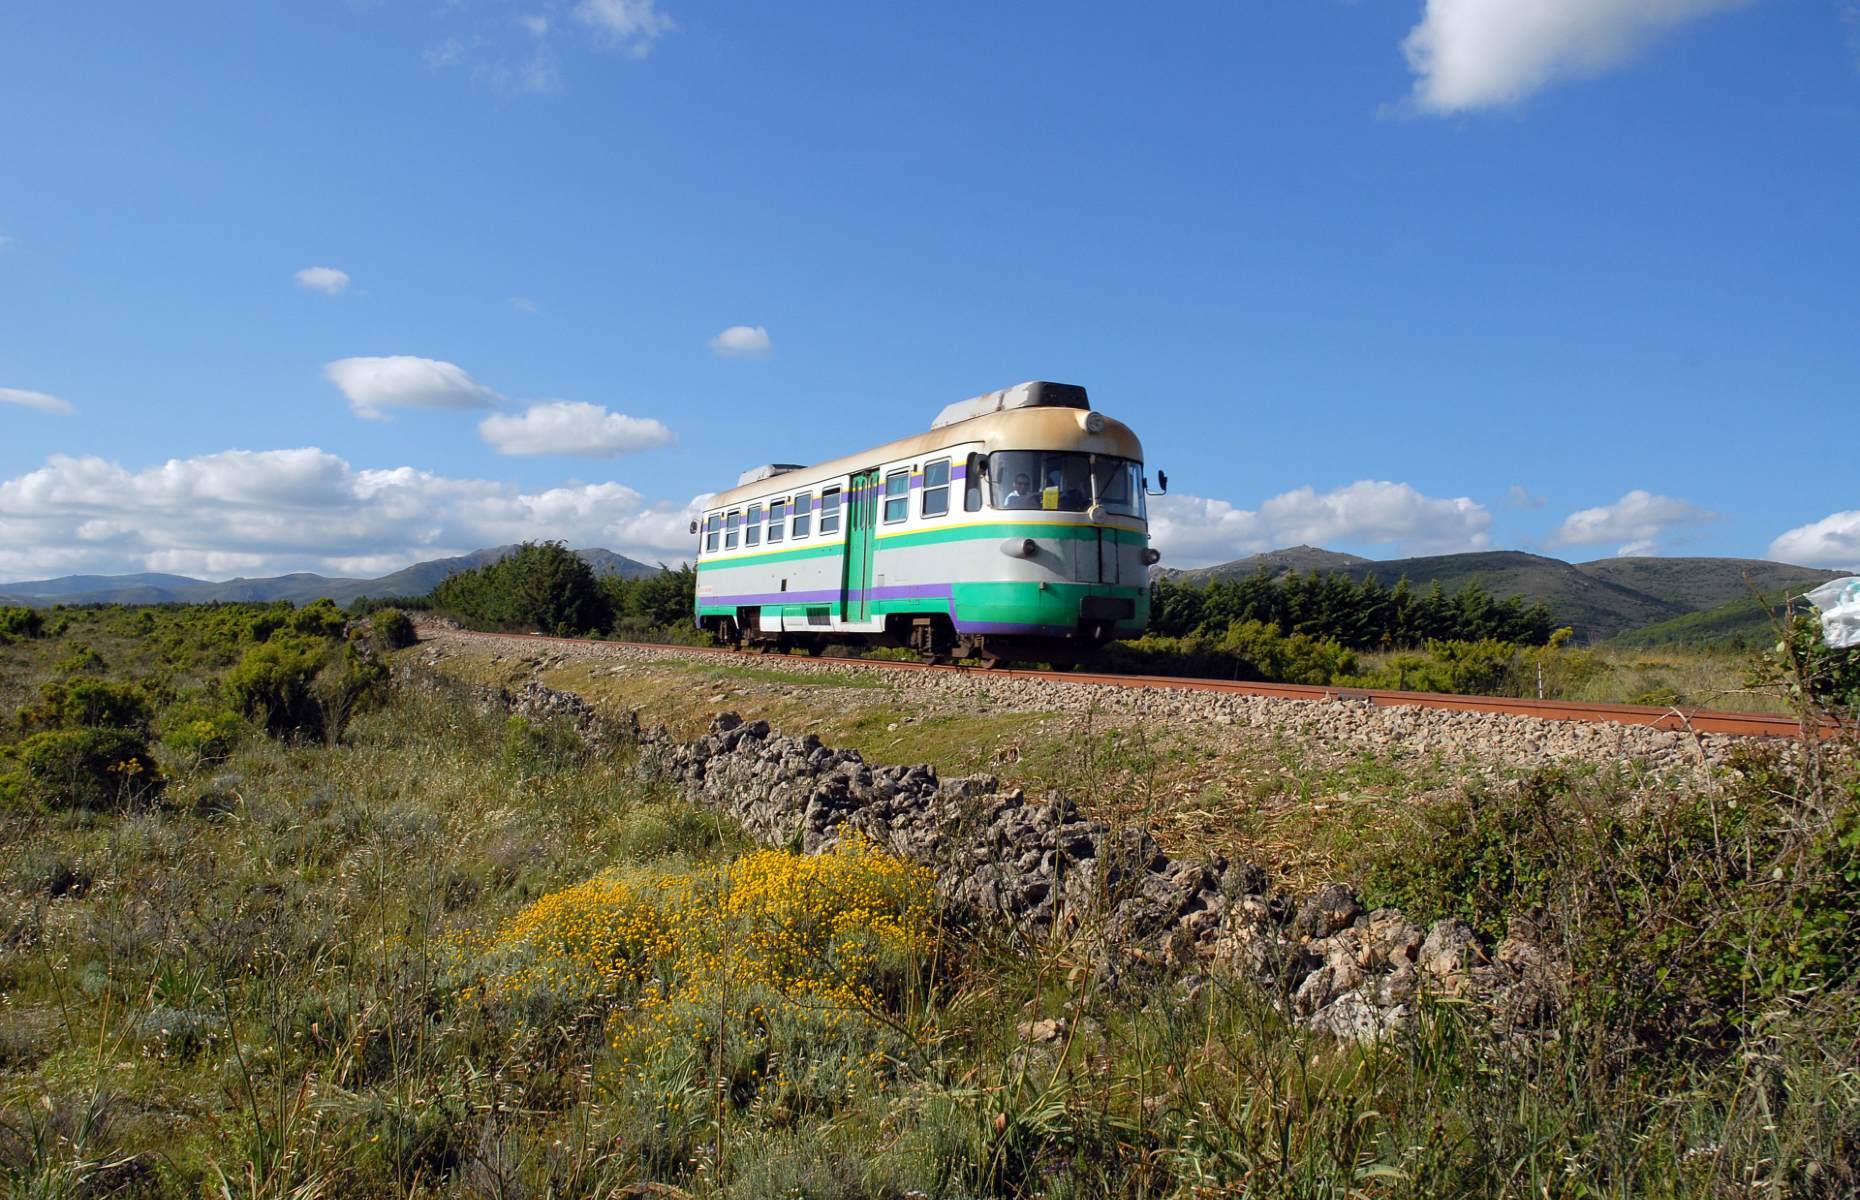 <p>Translating to 'little green train', the <a href="http://www.treninoverde.com/">Trenino Verde</a> is a sublime – and surprisingly little-known – way to see the Sardinian countryside. This 130-year-old vintage railway has five different routes across the country, totaling 272 miles (438km) of track, which pass through a treasure trove of landscapes, including olive groves, quaint villages, glittering seas, craggy coastlines and steep peaks. </p>